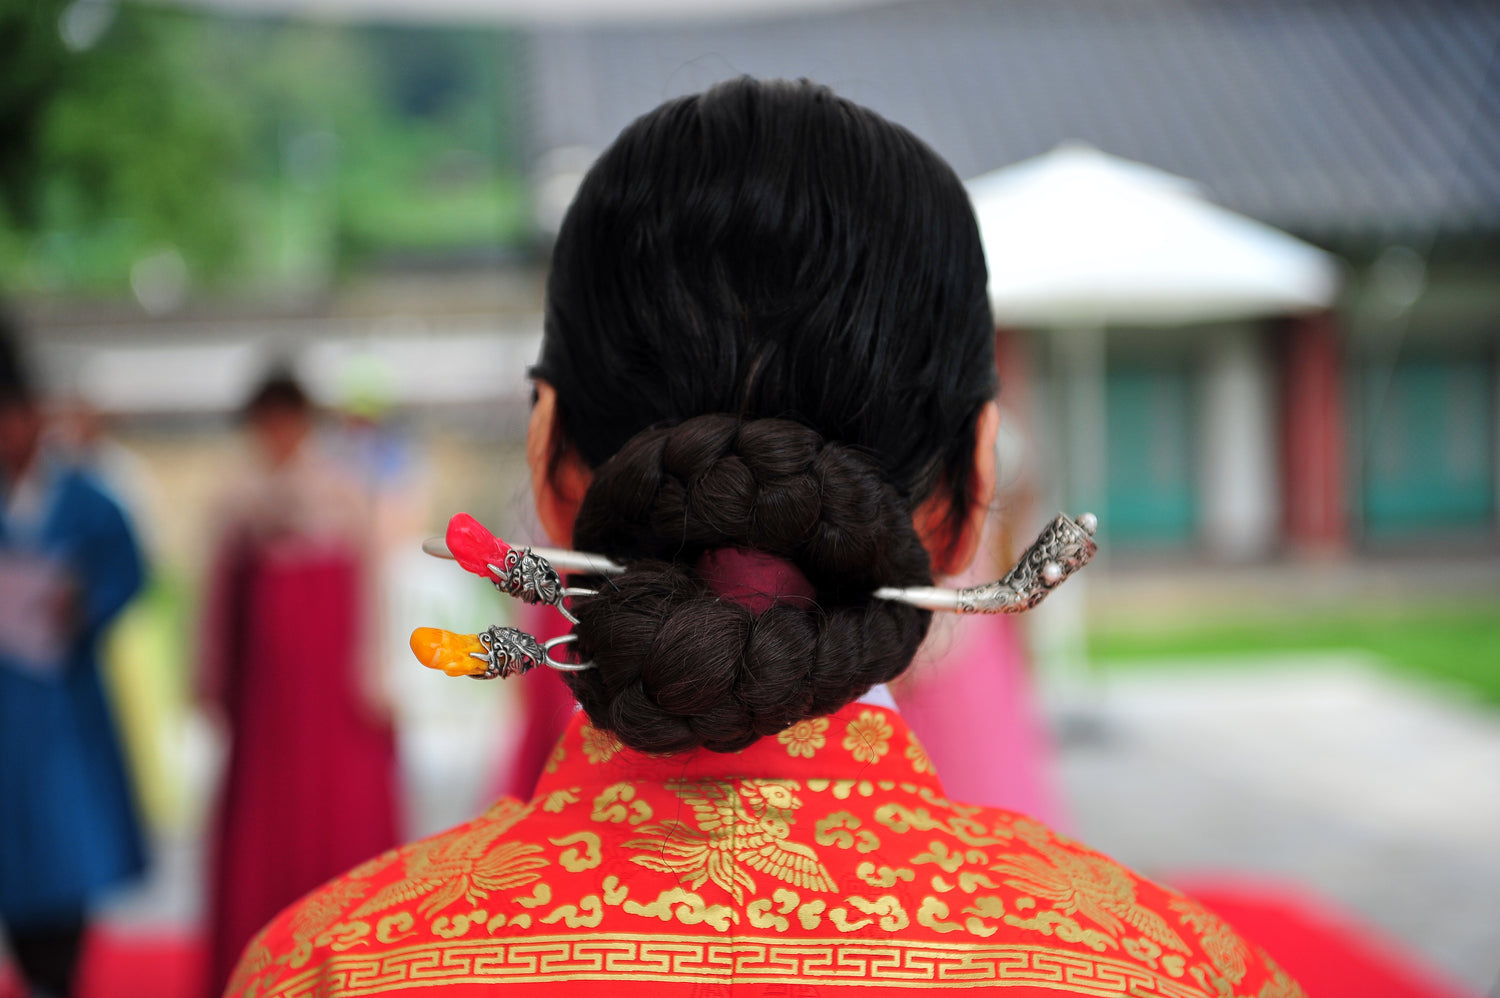 Traditional Korean Hairstyles Throughout History